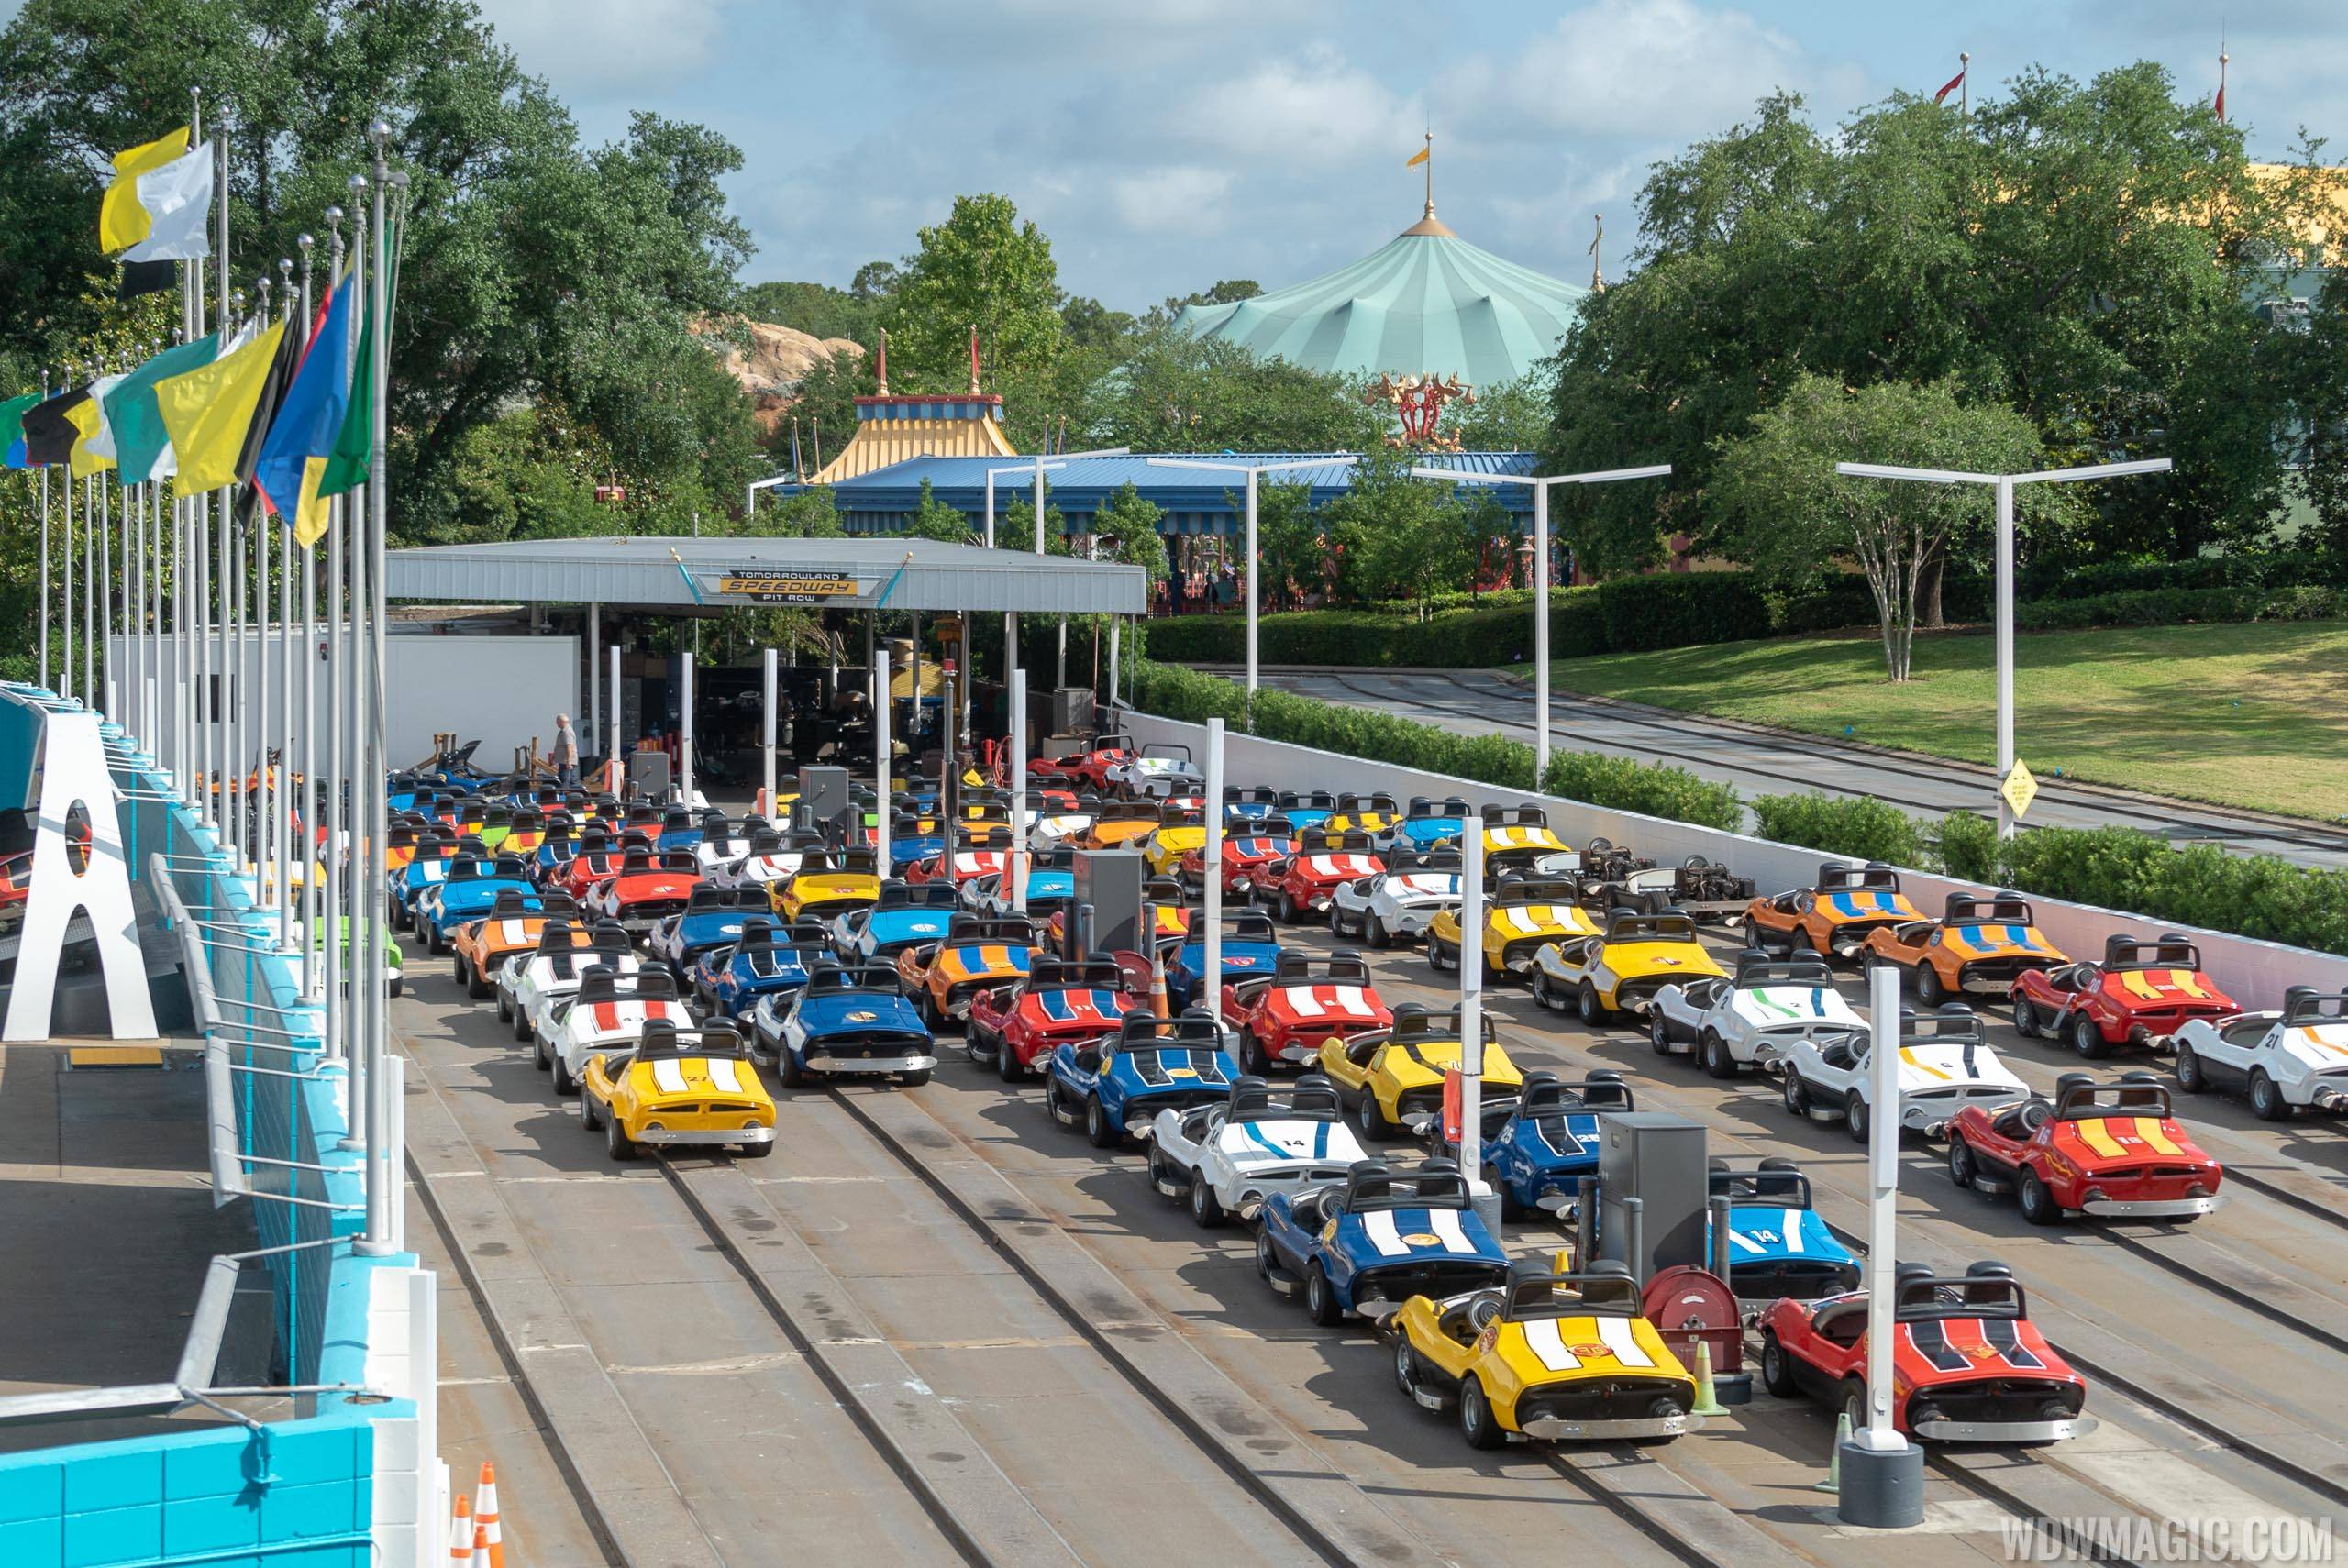 Temporary lane closures heading to Tomorrowland Speedway due to Fantasyland construction